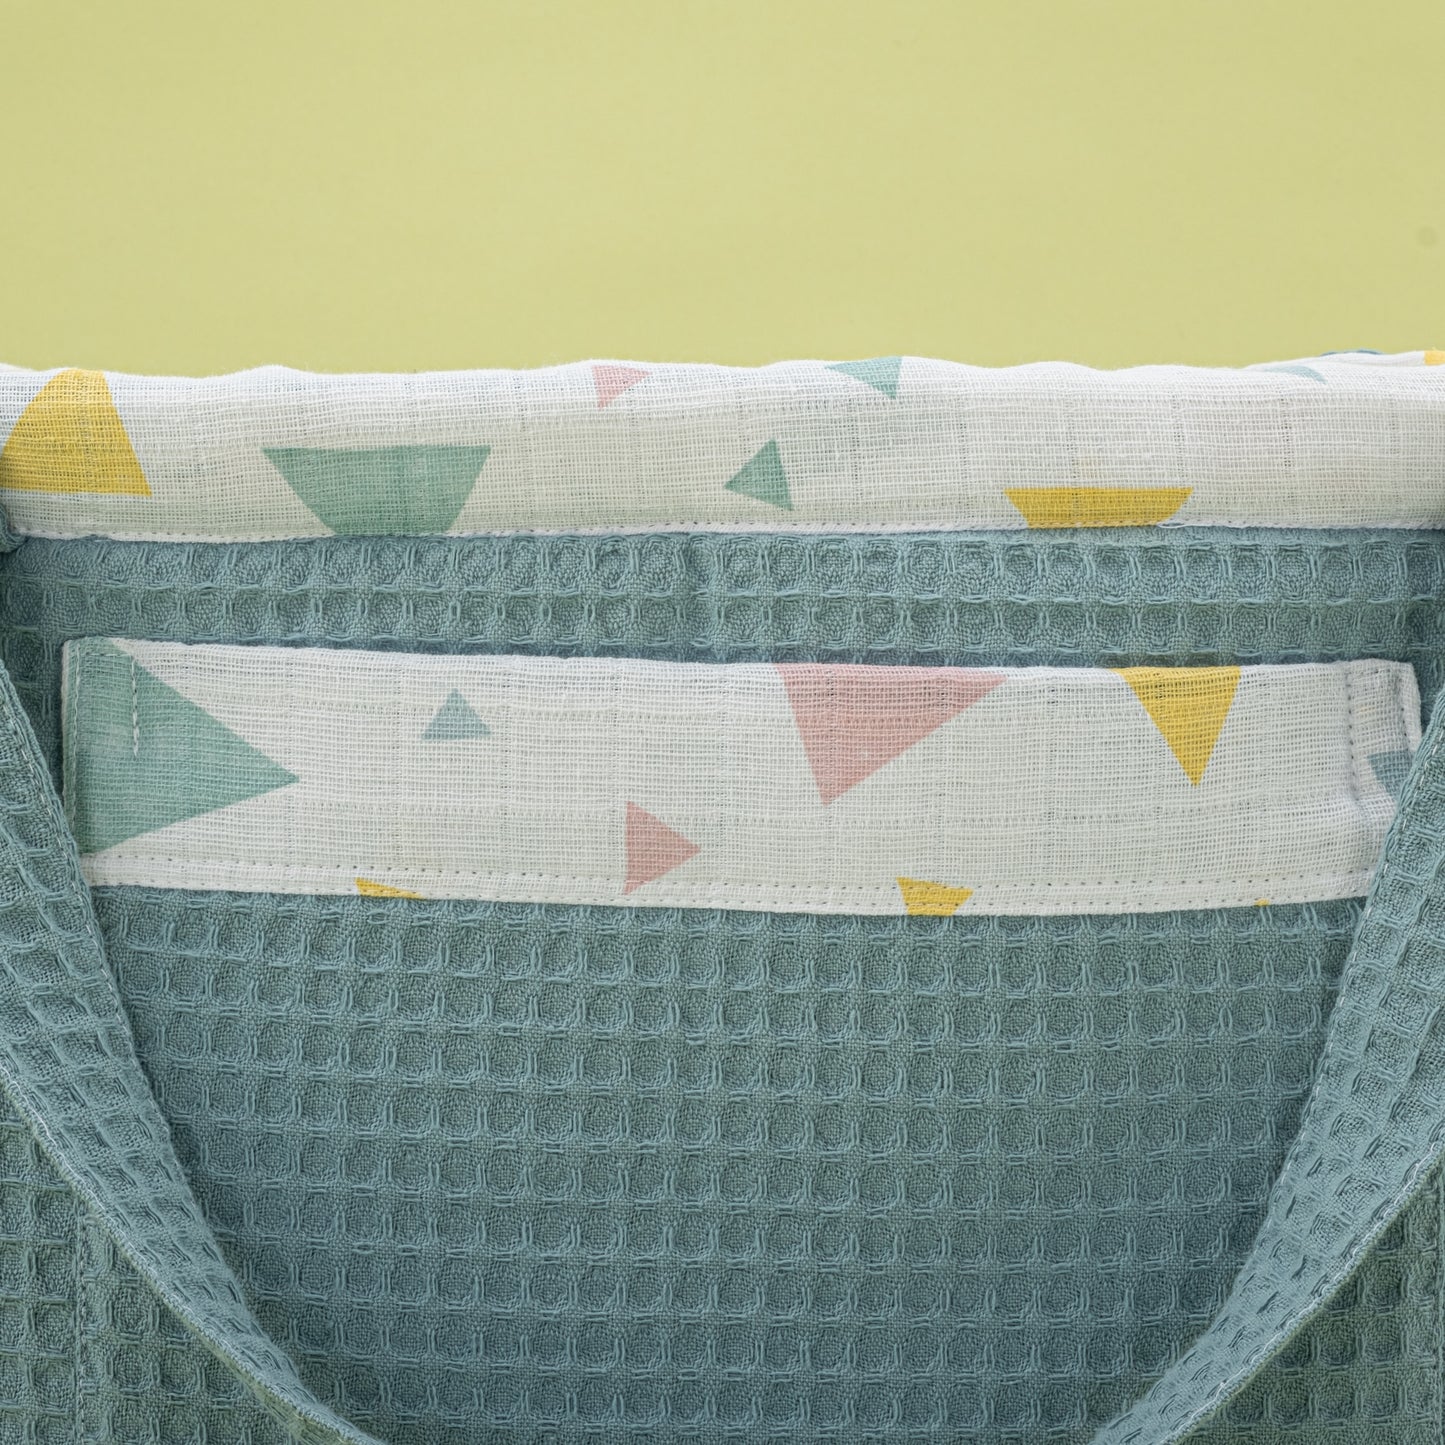 Baby Care Bag - Petrol Blue Honeycomb - Colored Triangles